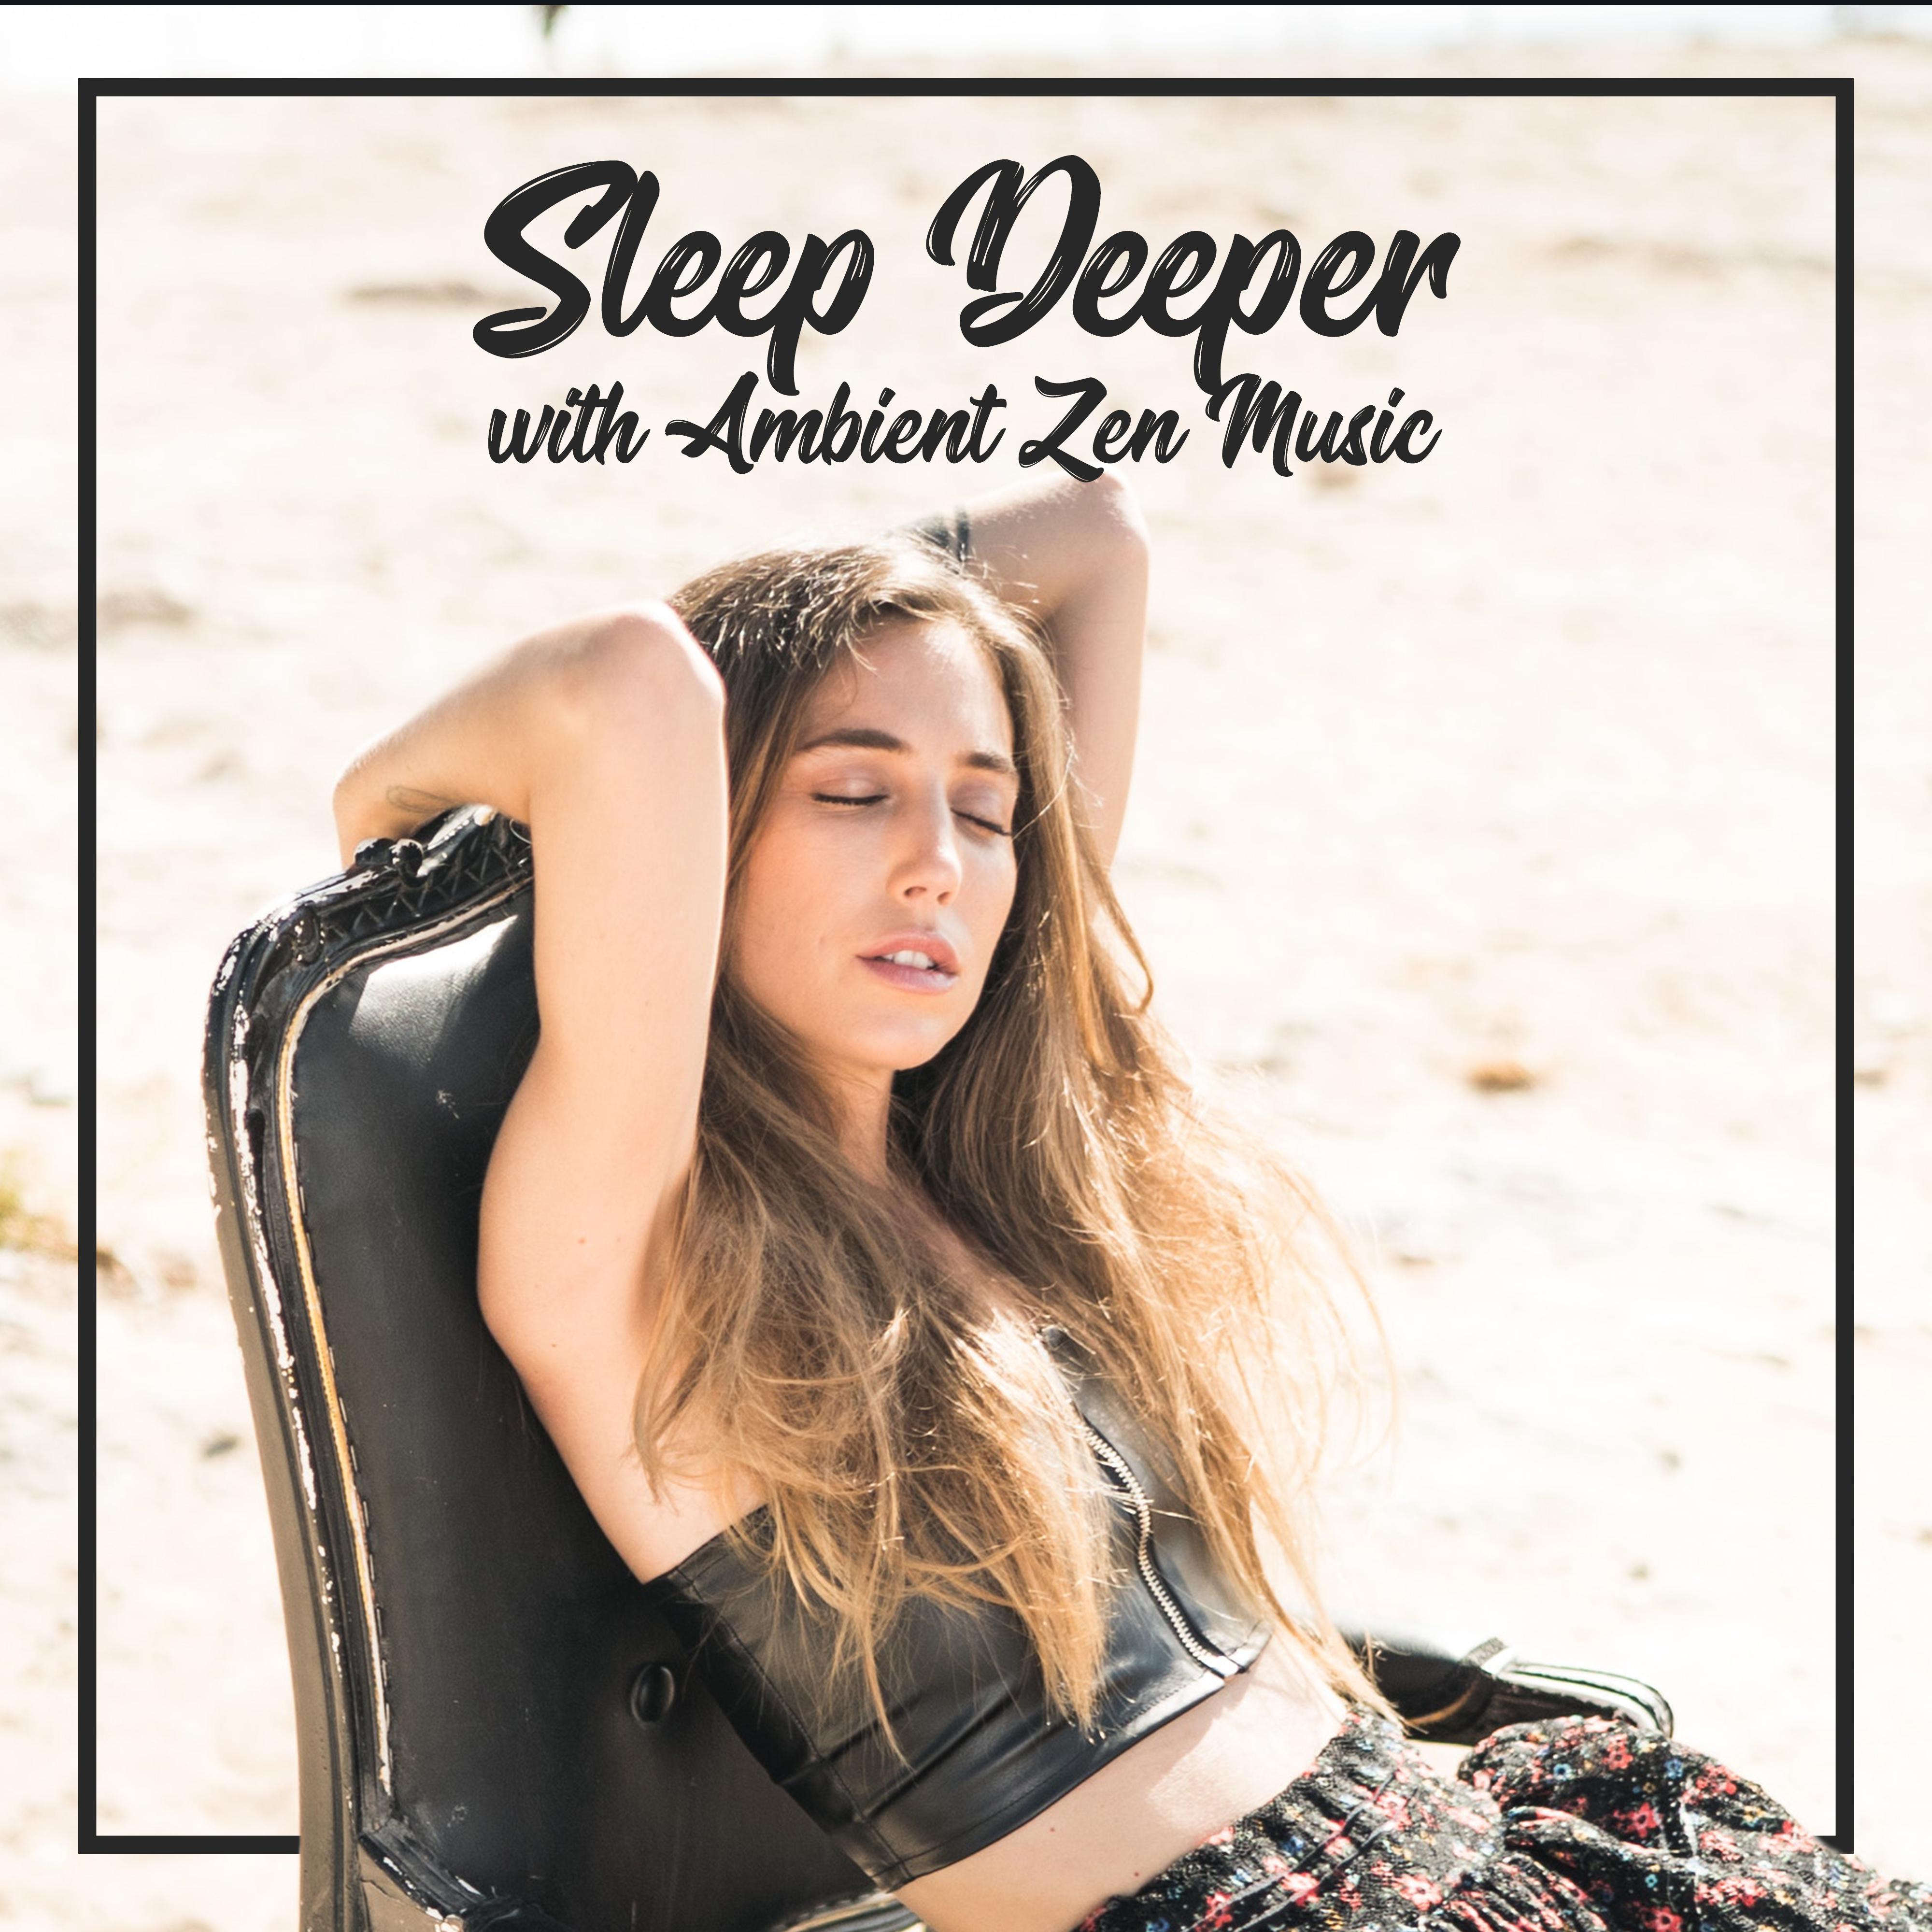 Sleep Deeper with Ambient Zen Music: 15 Tranquil Zen Songs Perfect for Sleep, Naps or Respite